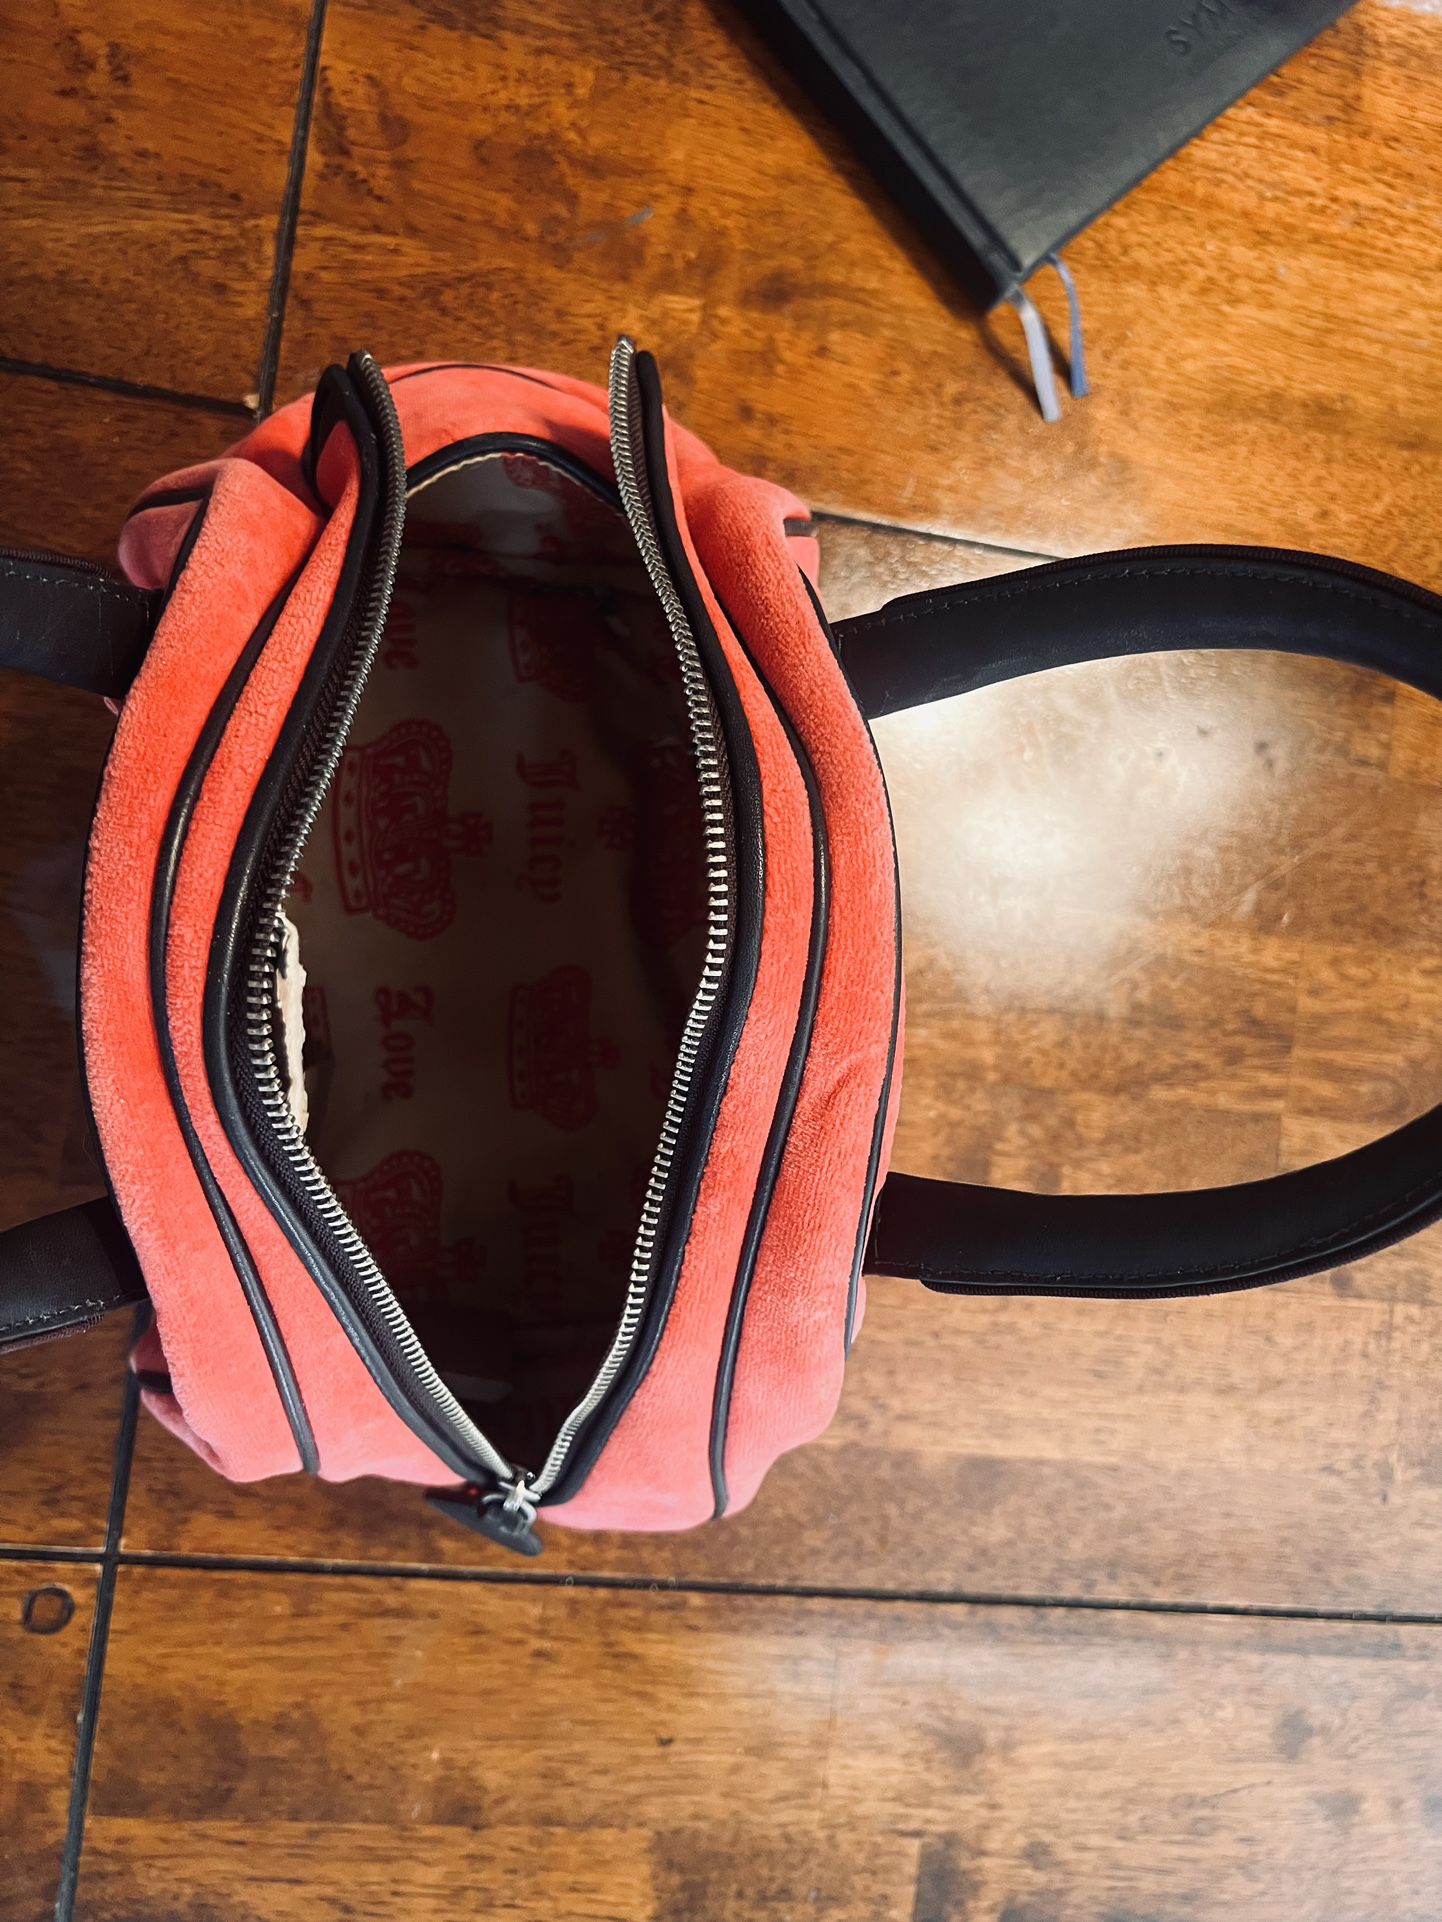 Cool Vintage Bowling Ball Bag Repurpose As Purse for Sale in Charlestown,  RI - OfferUp